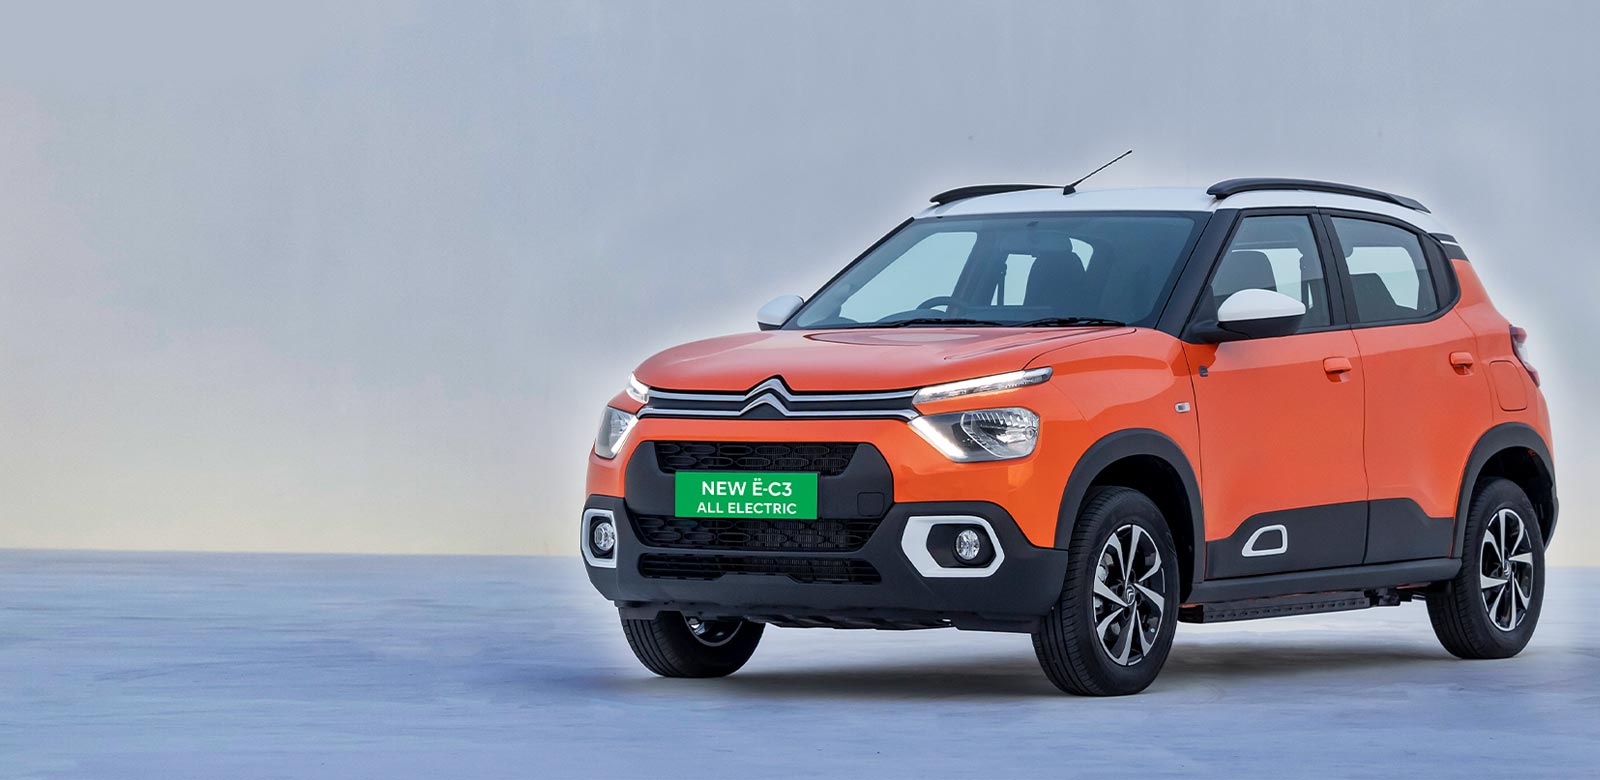 citroenc5-aircross-c3-ec3-and-c3-aircross-company-did-not-sell-a-single-unit-of-ec3-electric-car-in-a-month